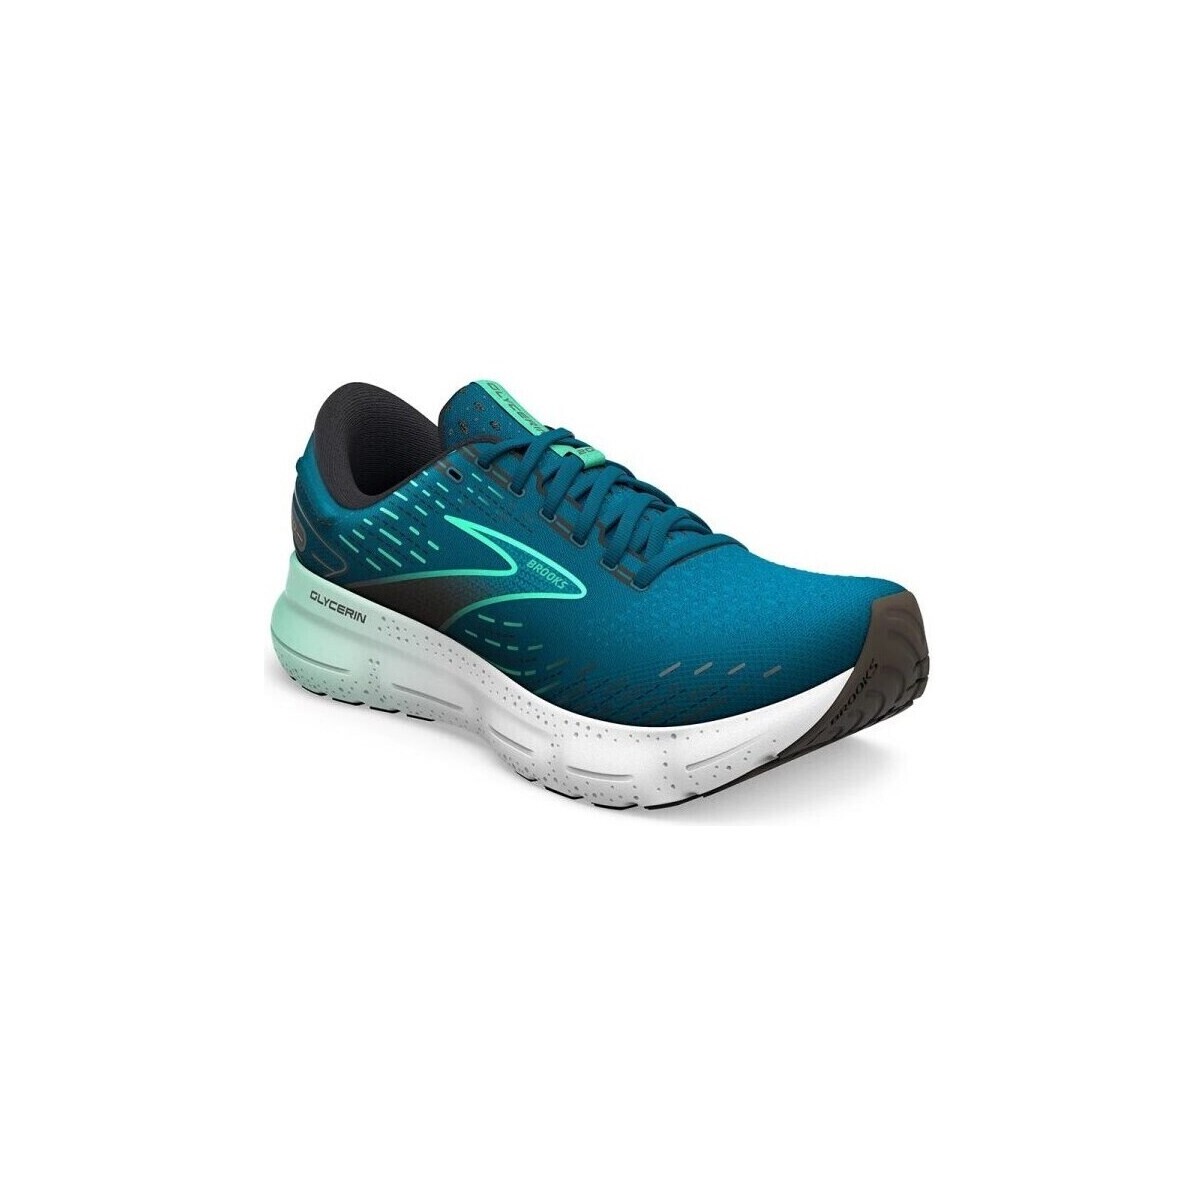 Shoes Men Running shoes Brooks Glycerin 20 | Moroccan Blue Blue